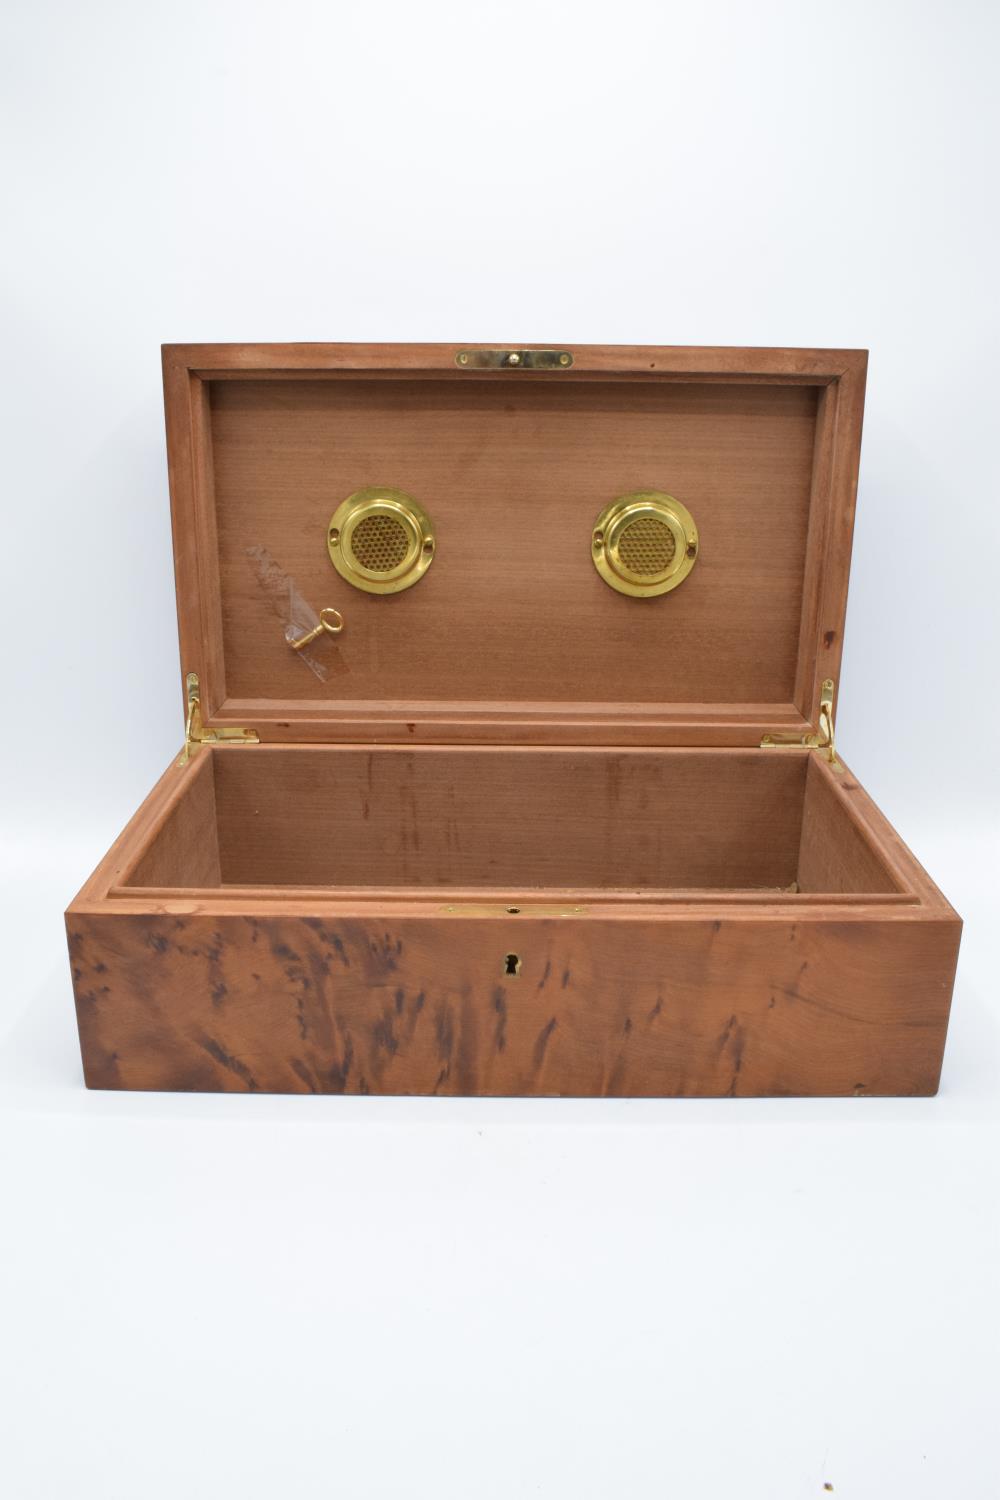 A modern veneered wooden cigar humidor with brass fixtures and fitting with a working lock and - Image 2 of 7